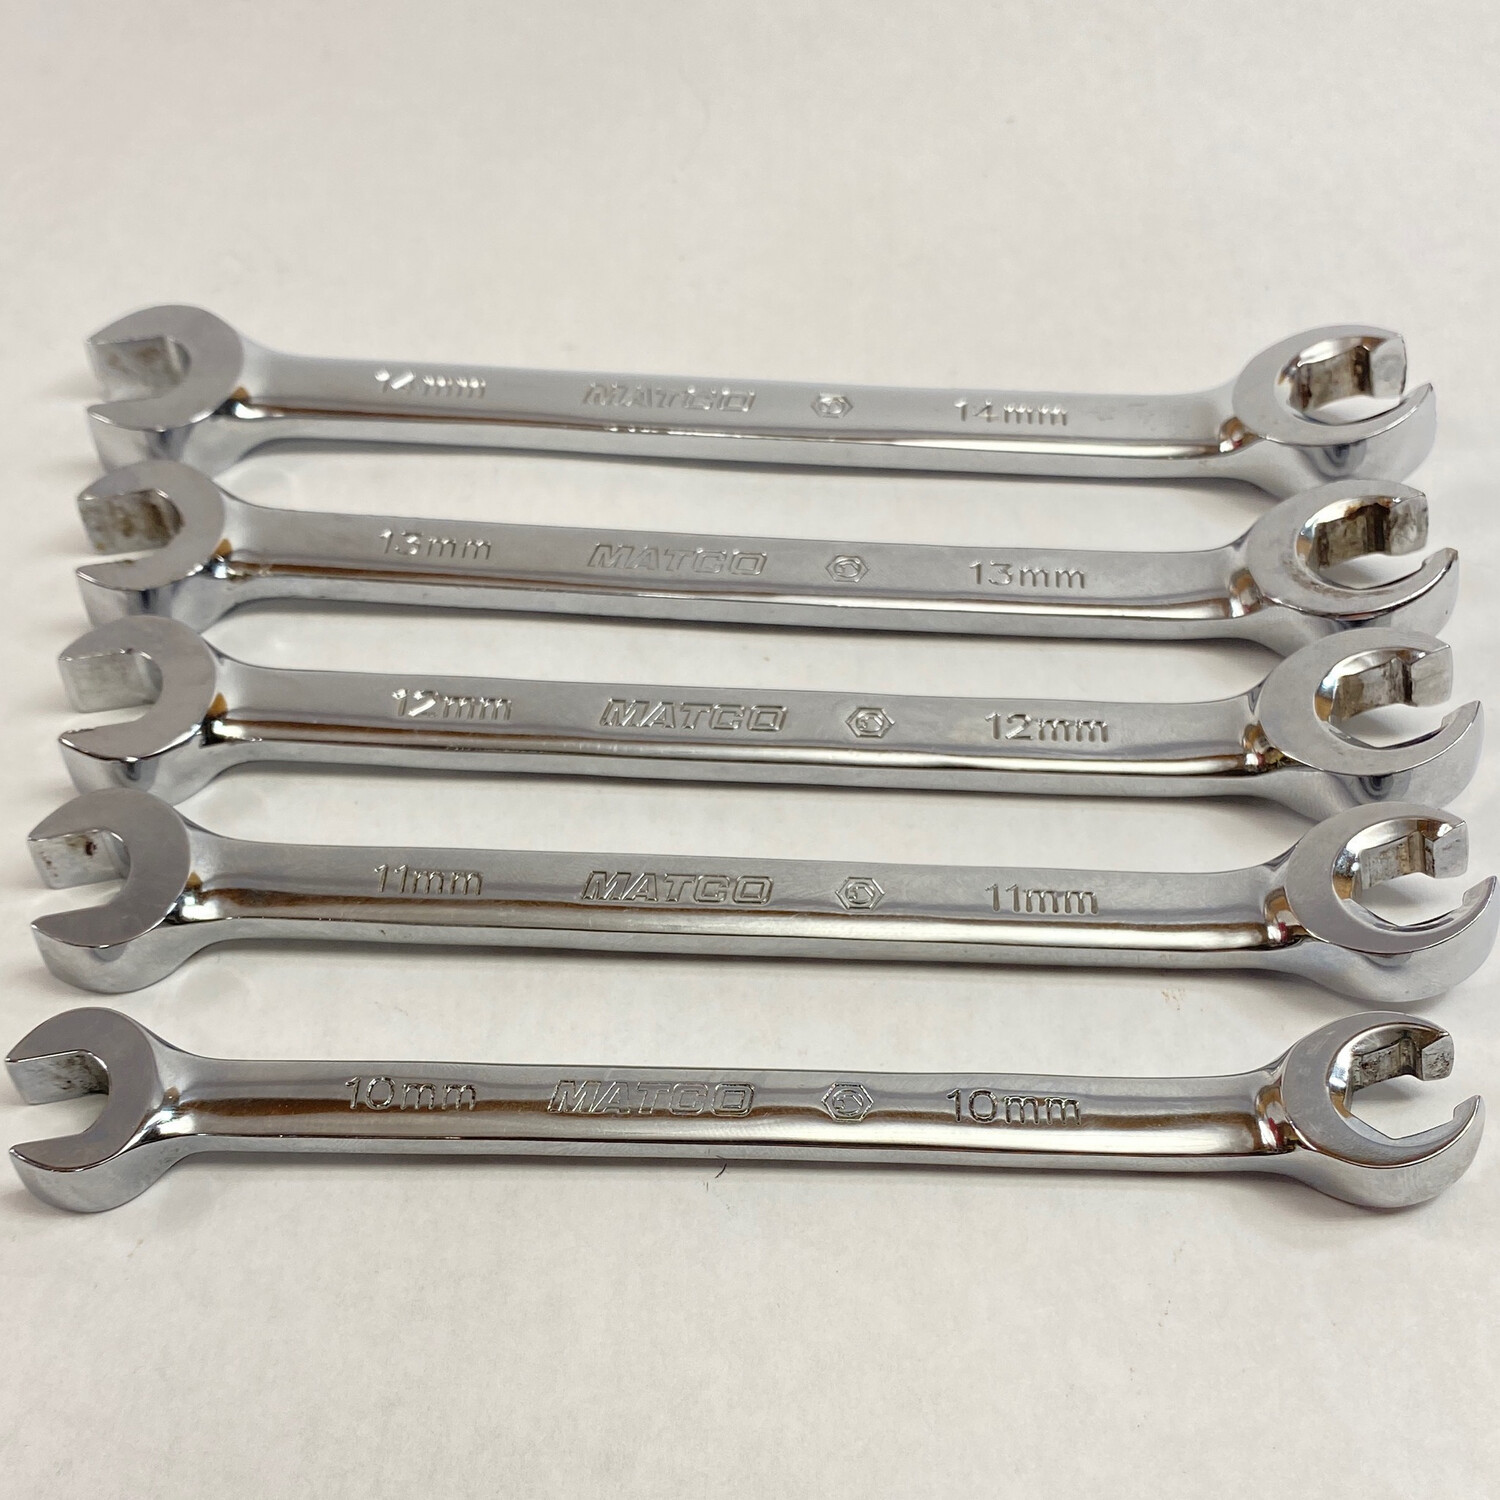 Matco Tools 5pc Metric Flare Nut Combination Wrench Set, SRFCM5TA